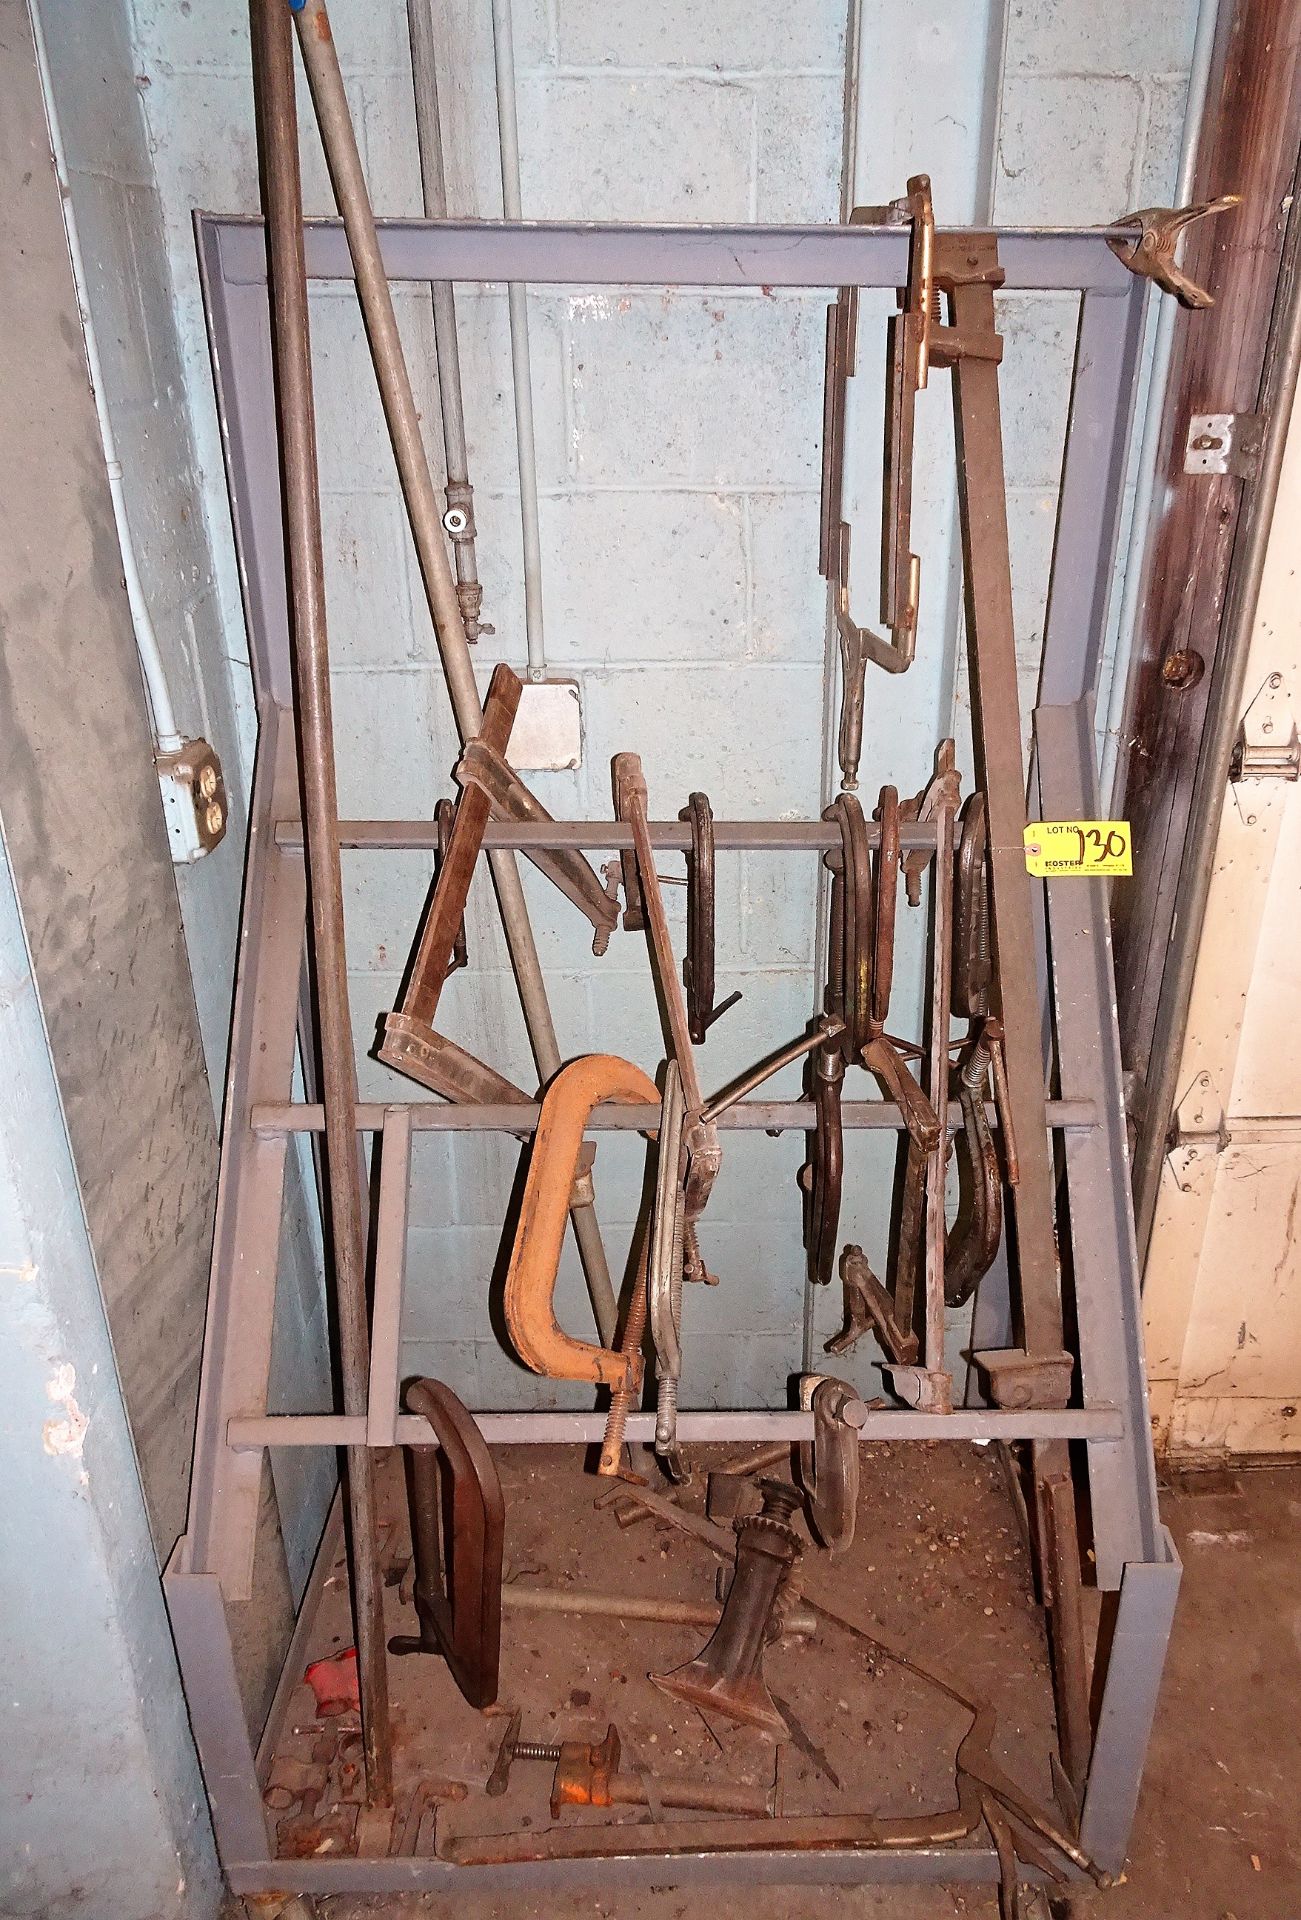 Castered Cantilevered Rack with Contents Consisting of: Bar Clamps, C-Clamps, Welding Clamps - Image 2 of 2